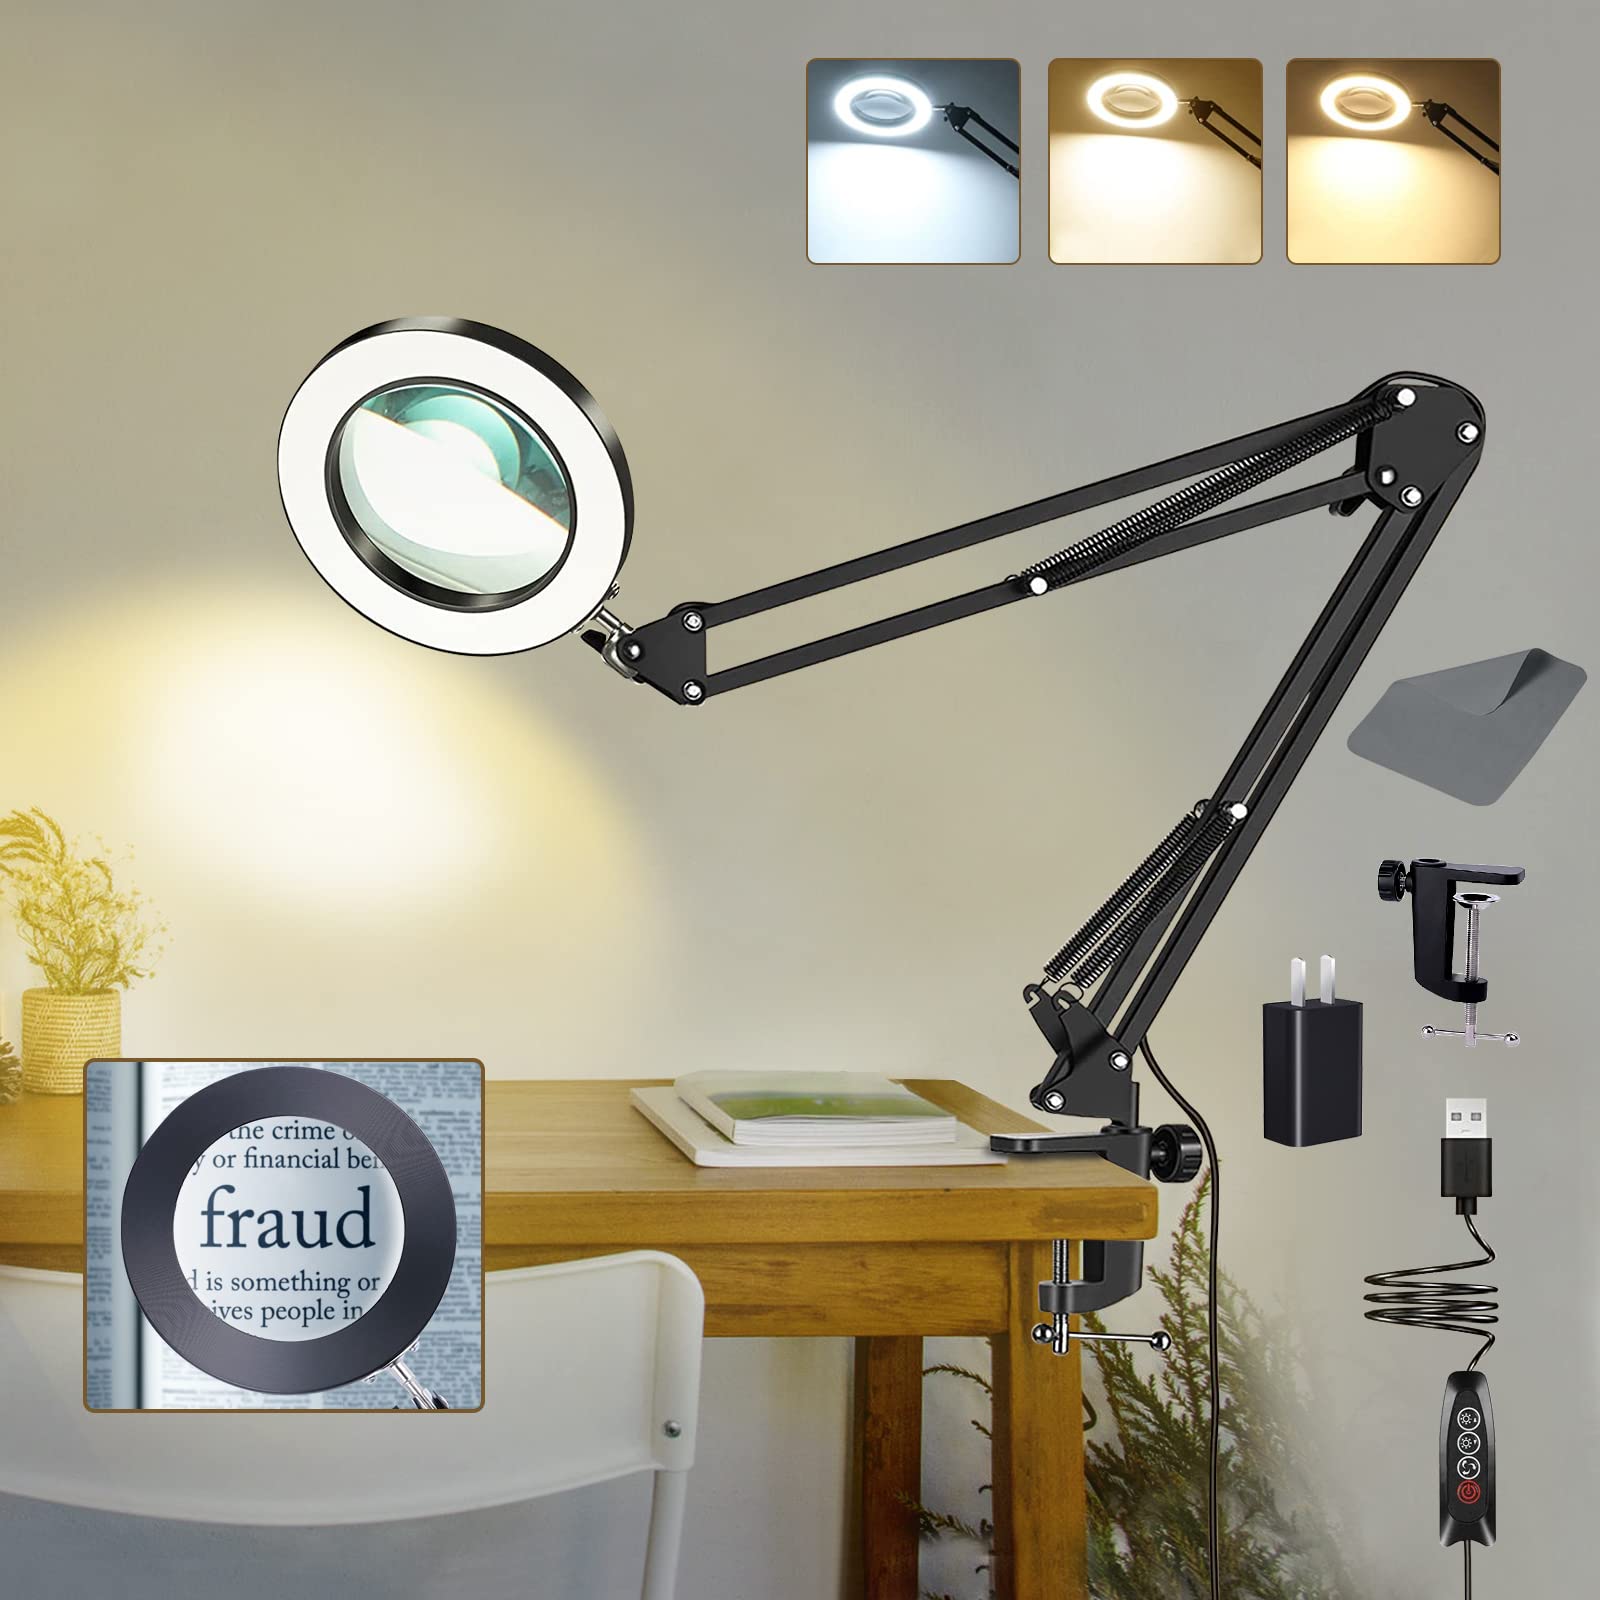 2-in-1 LED Lighted Magnifying Glass with Stand - 10X UK